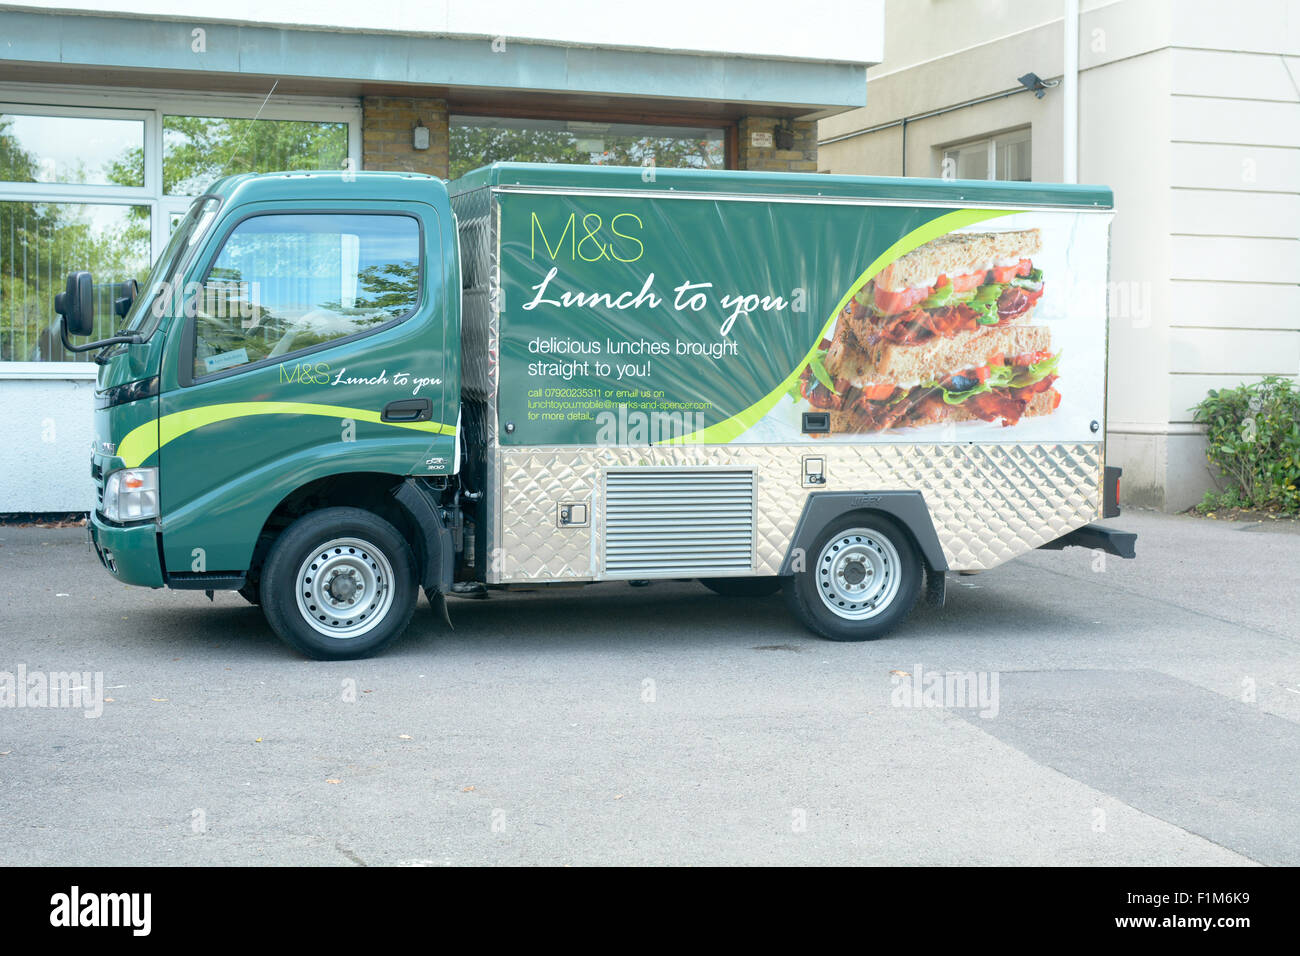 M&S (Marks and Spencers) 'Lunch to You' sandwich van impacting local delivery services in Bedford, Bedfordshire, England Stock Photo